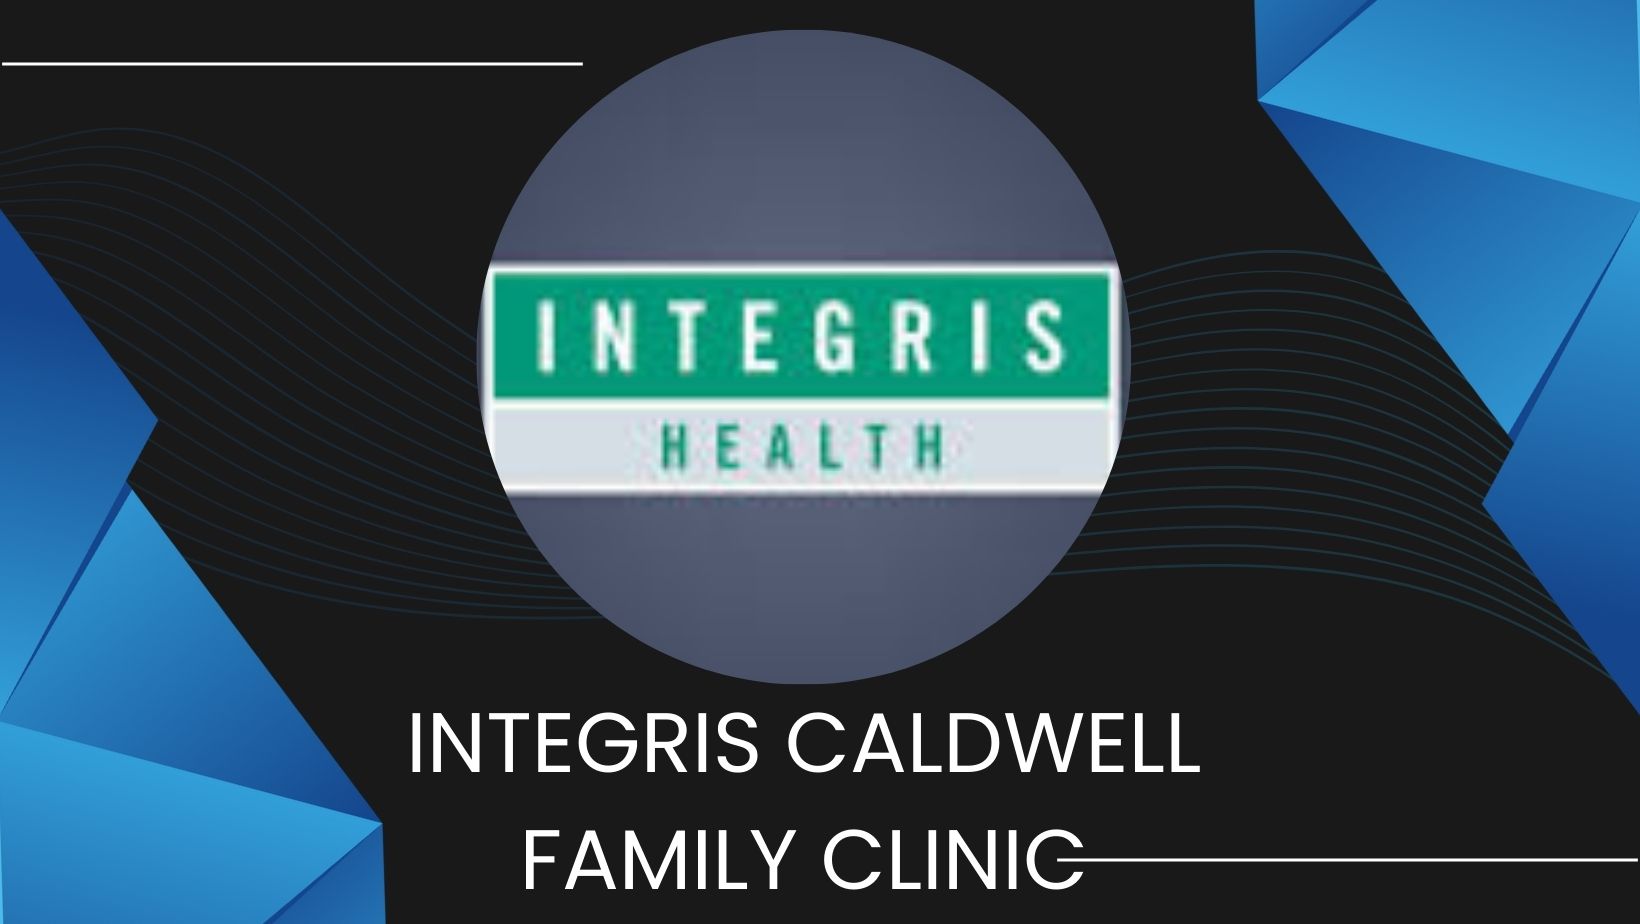 INTEGRIS CALDWELL FAMILY CLINIC